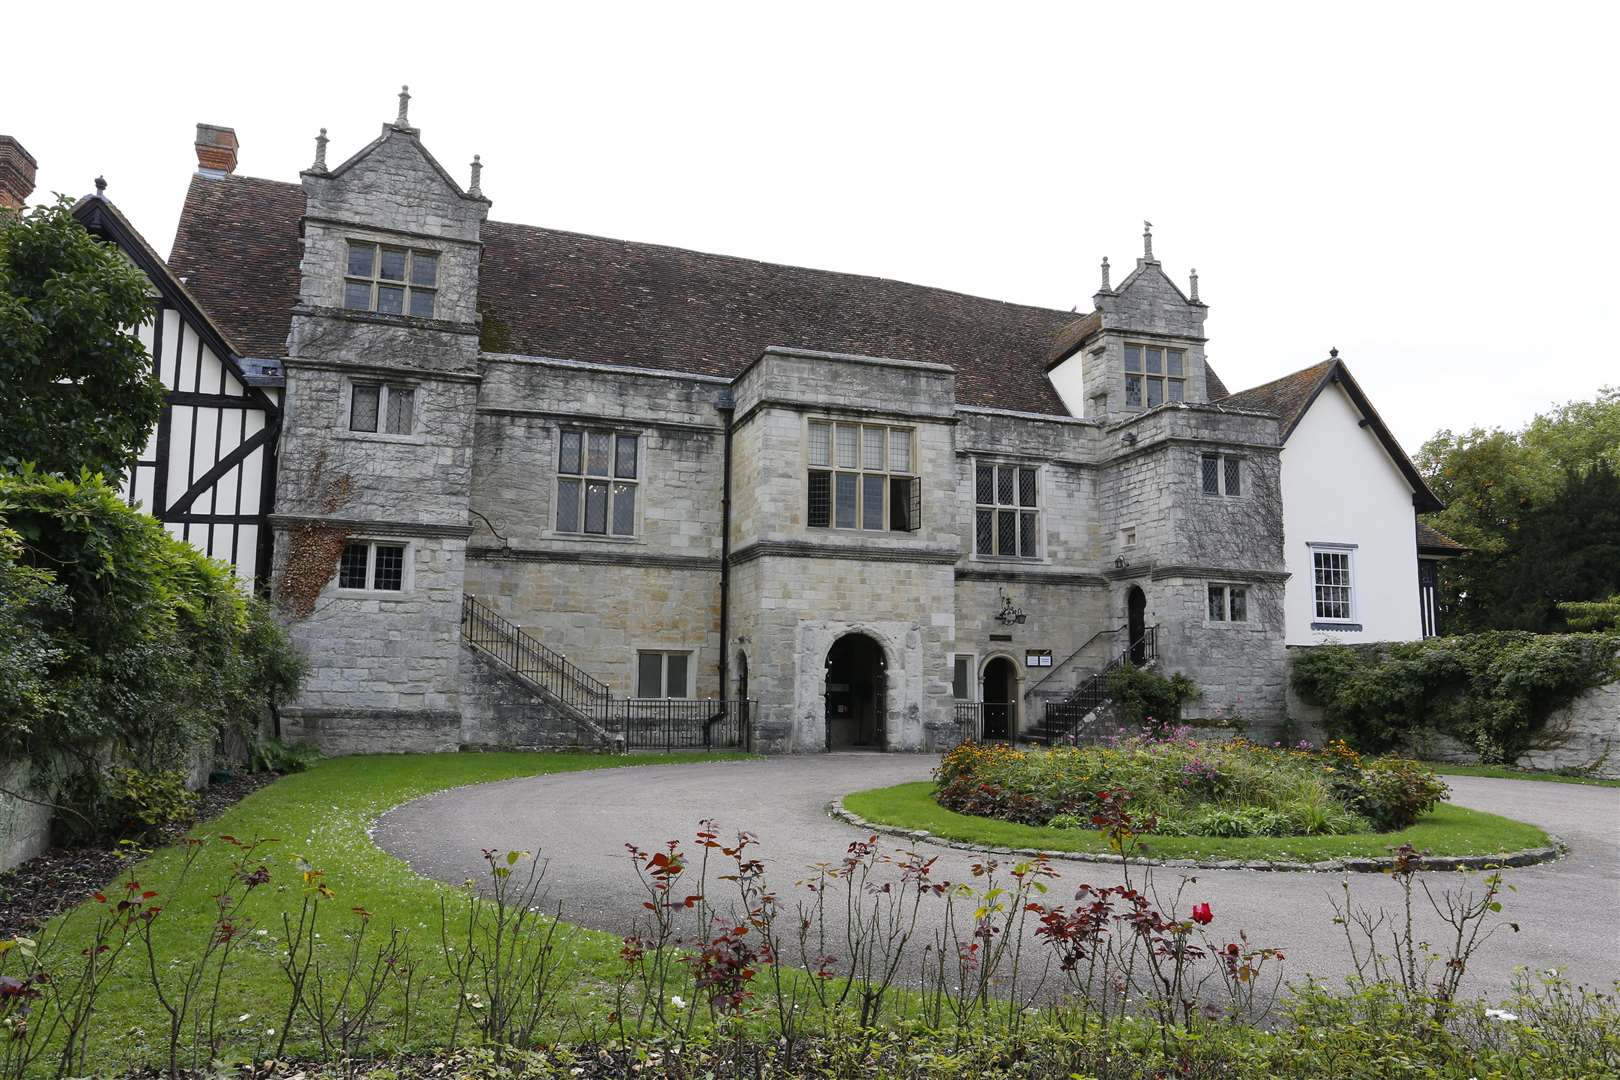 An inquest at archbishops palace concluded that the rough sleeper had died from alcohol toxicity